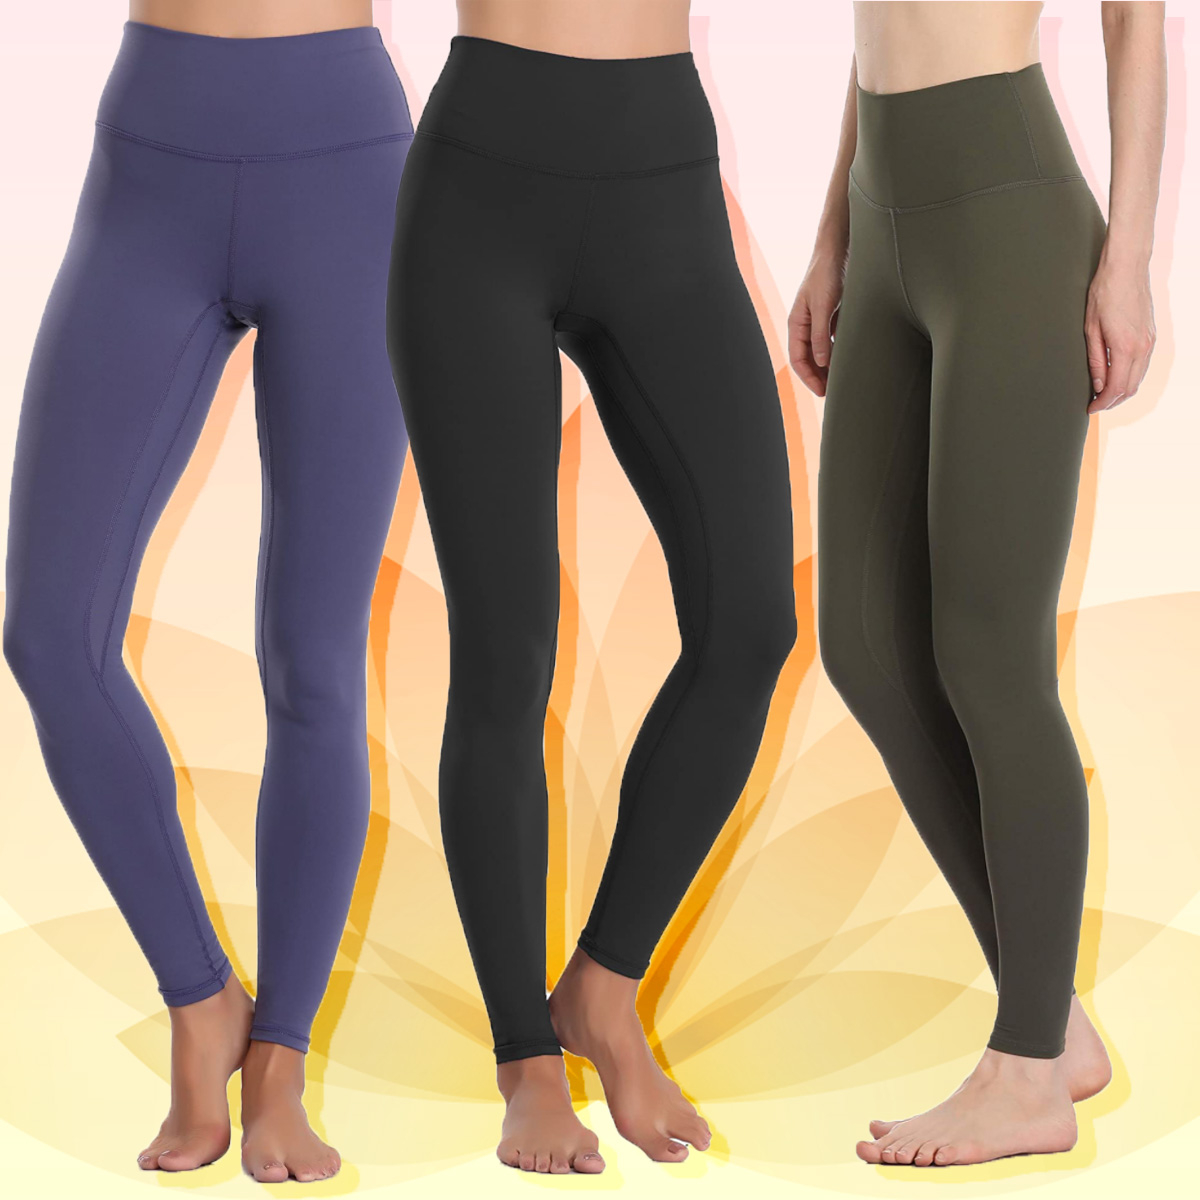 These Buttery Soft $23 Leggings Have 12,000 Five-Star  Reviews